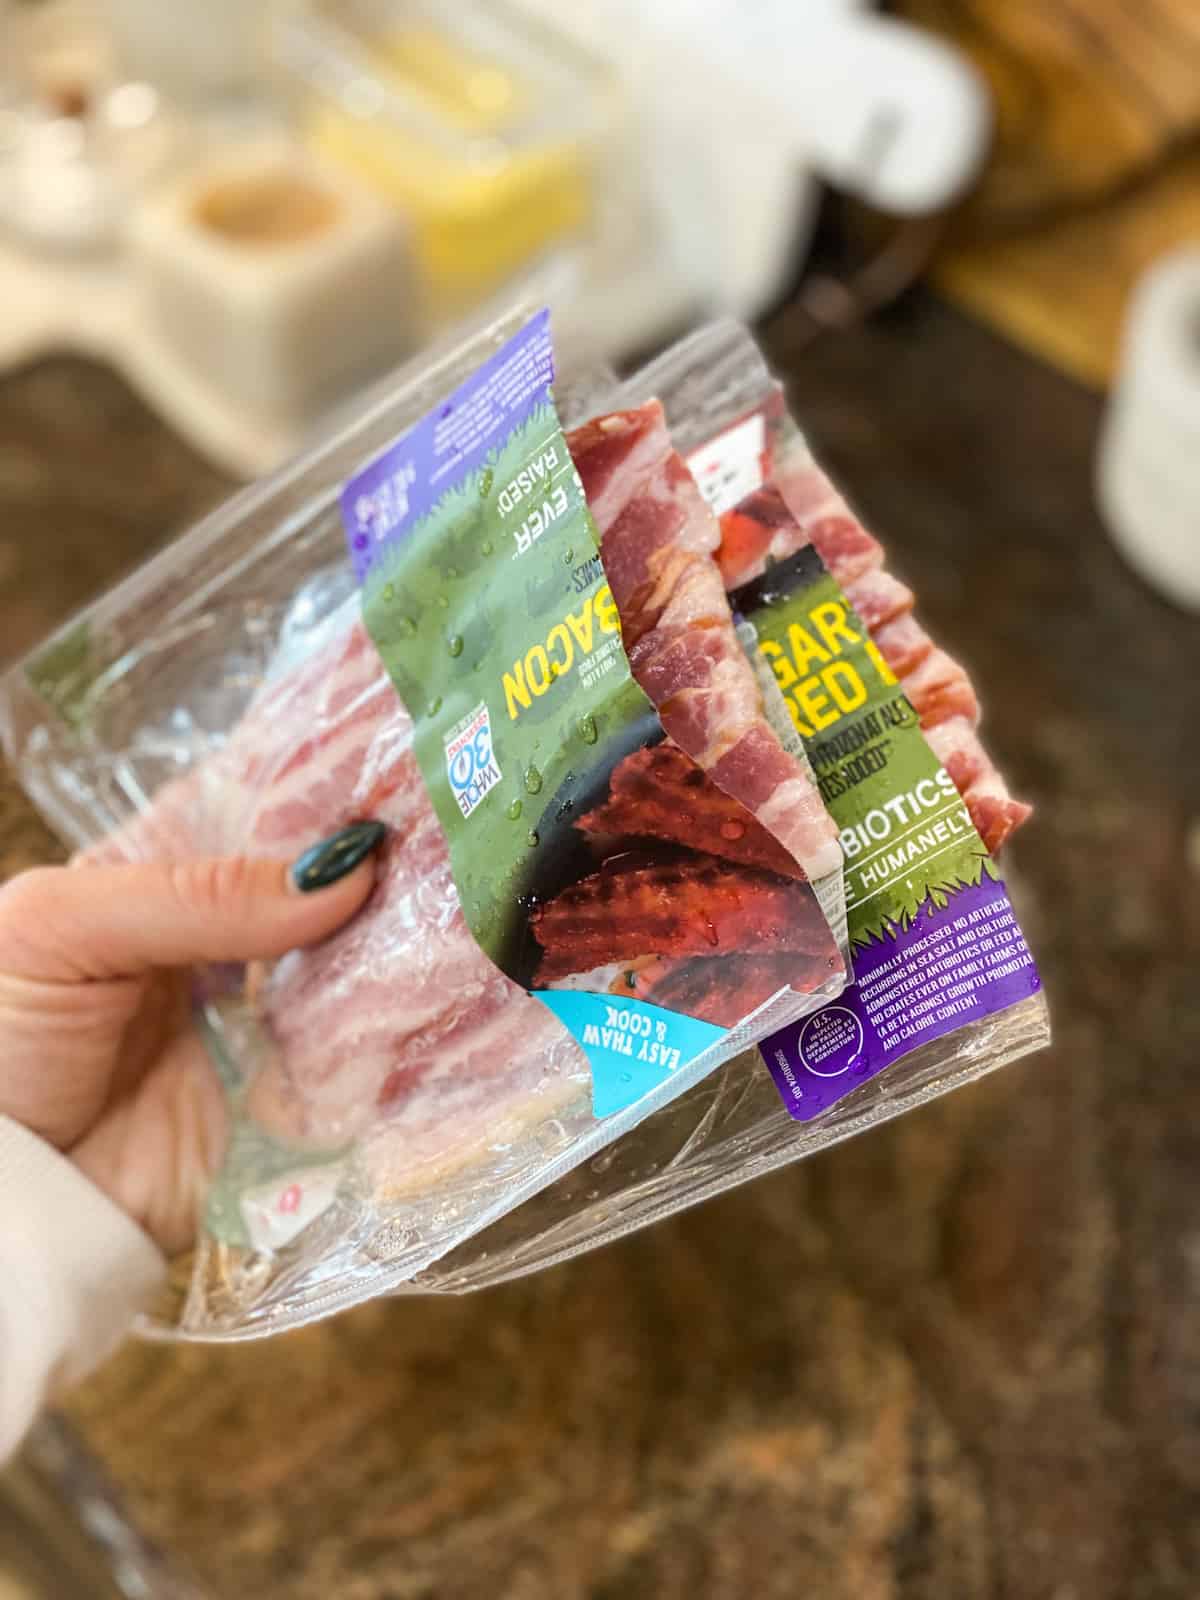 Bacon package opened in a hand